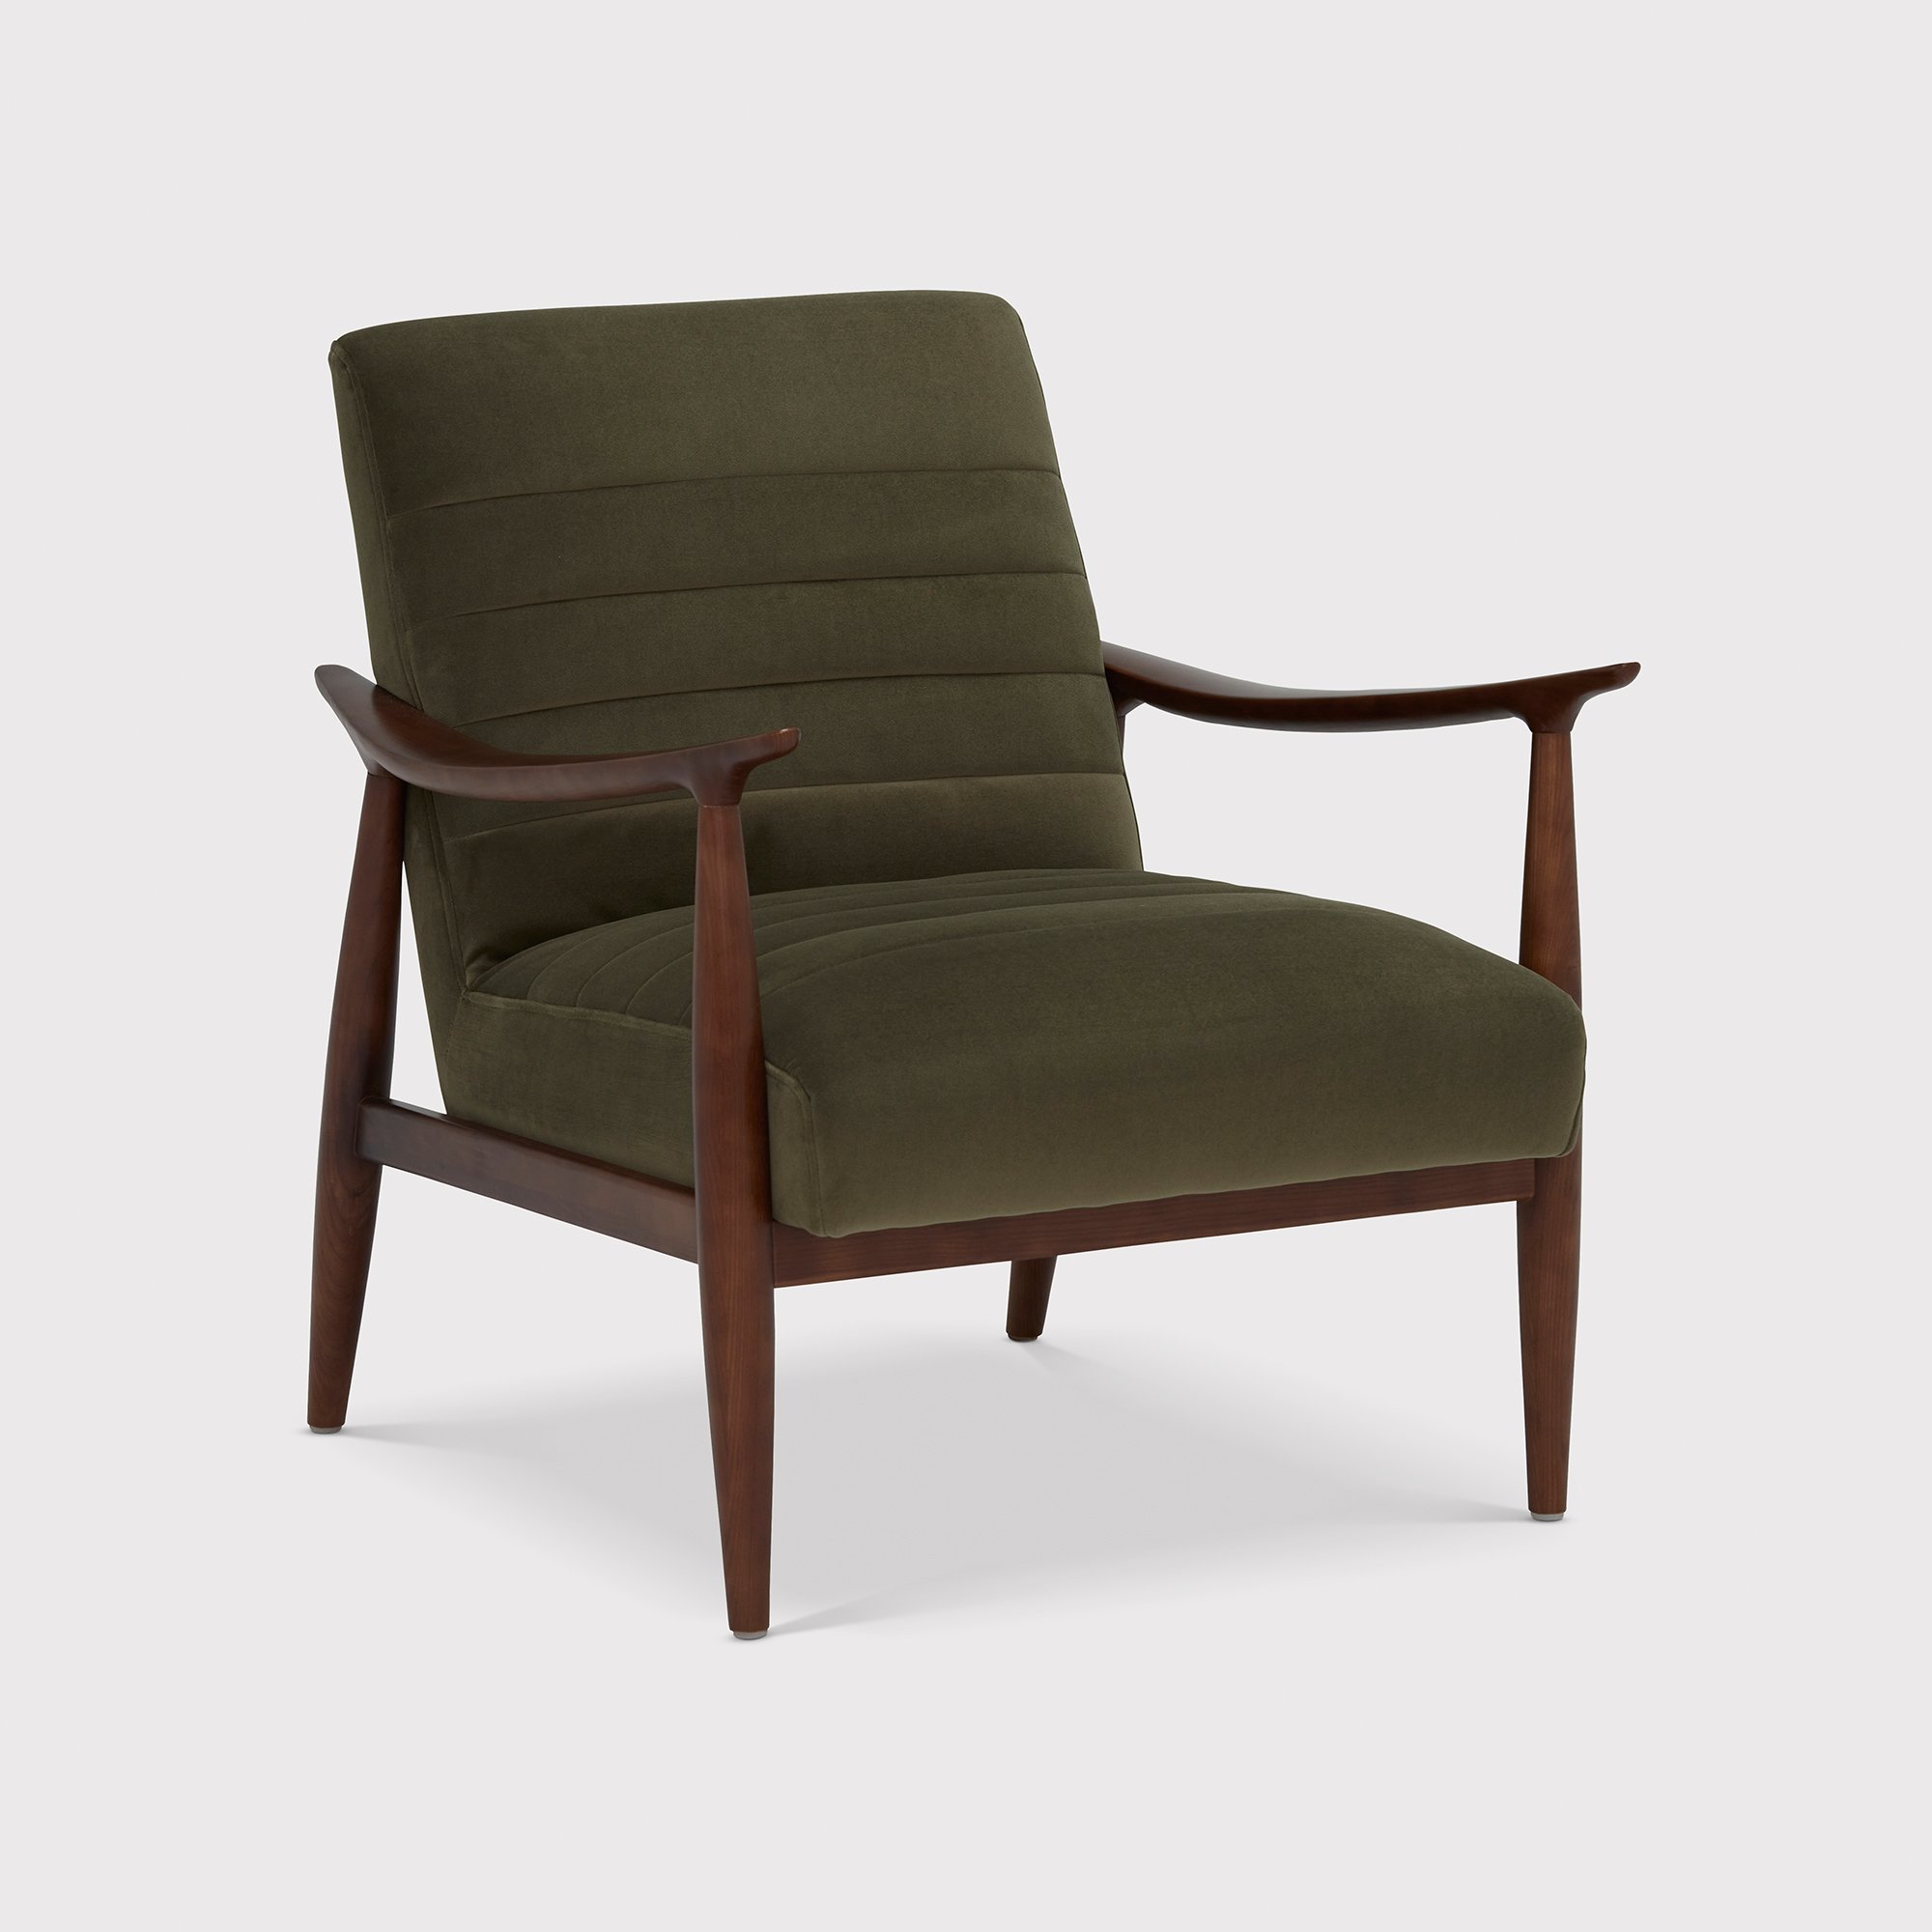 Photo of Hockney armchair in green fabric